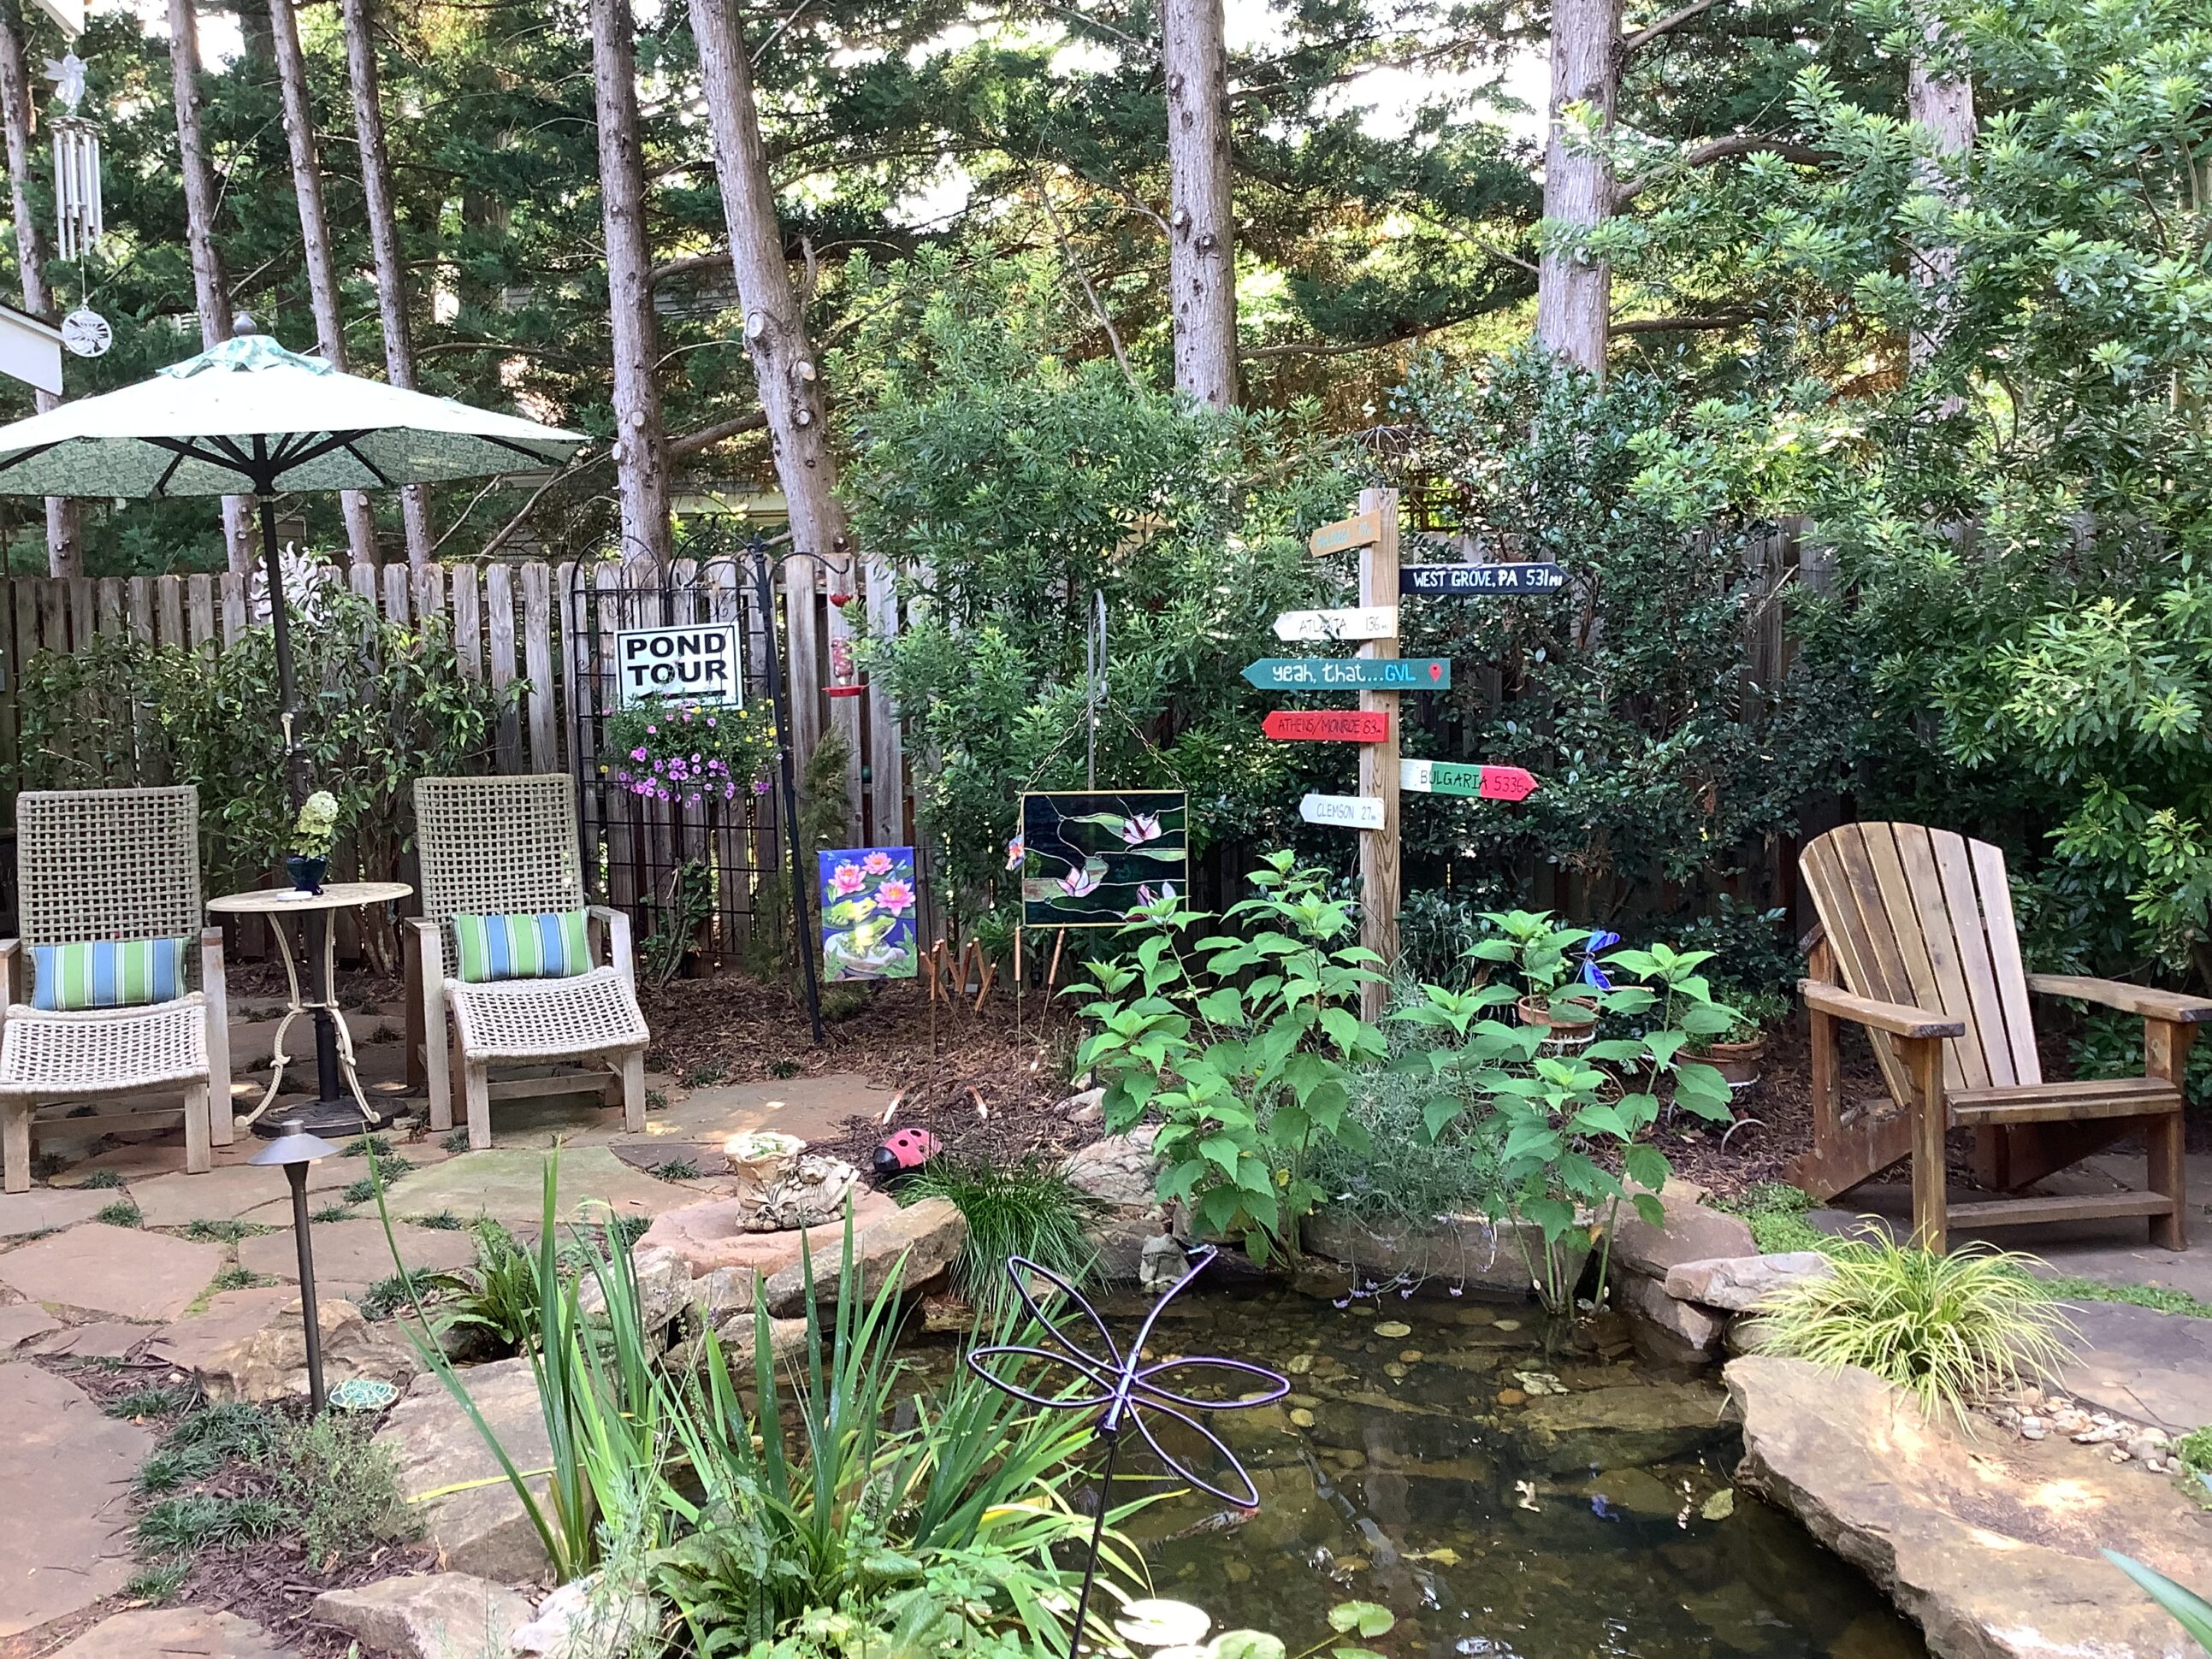 A garden with chairs, pond and trees.